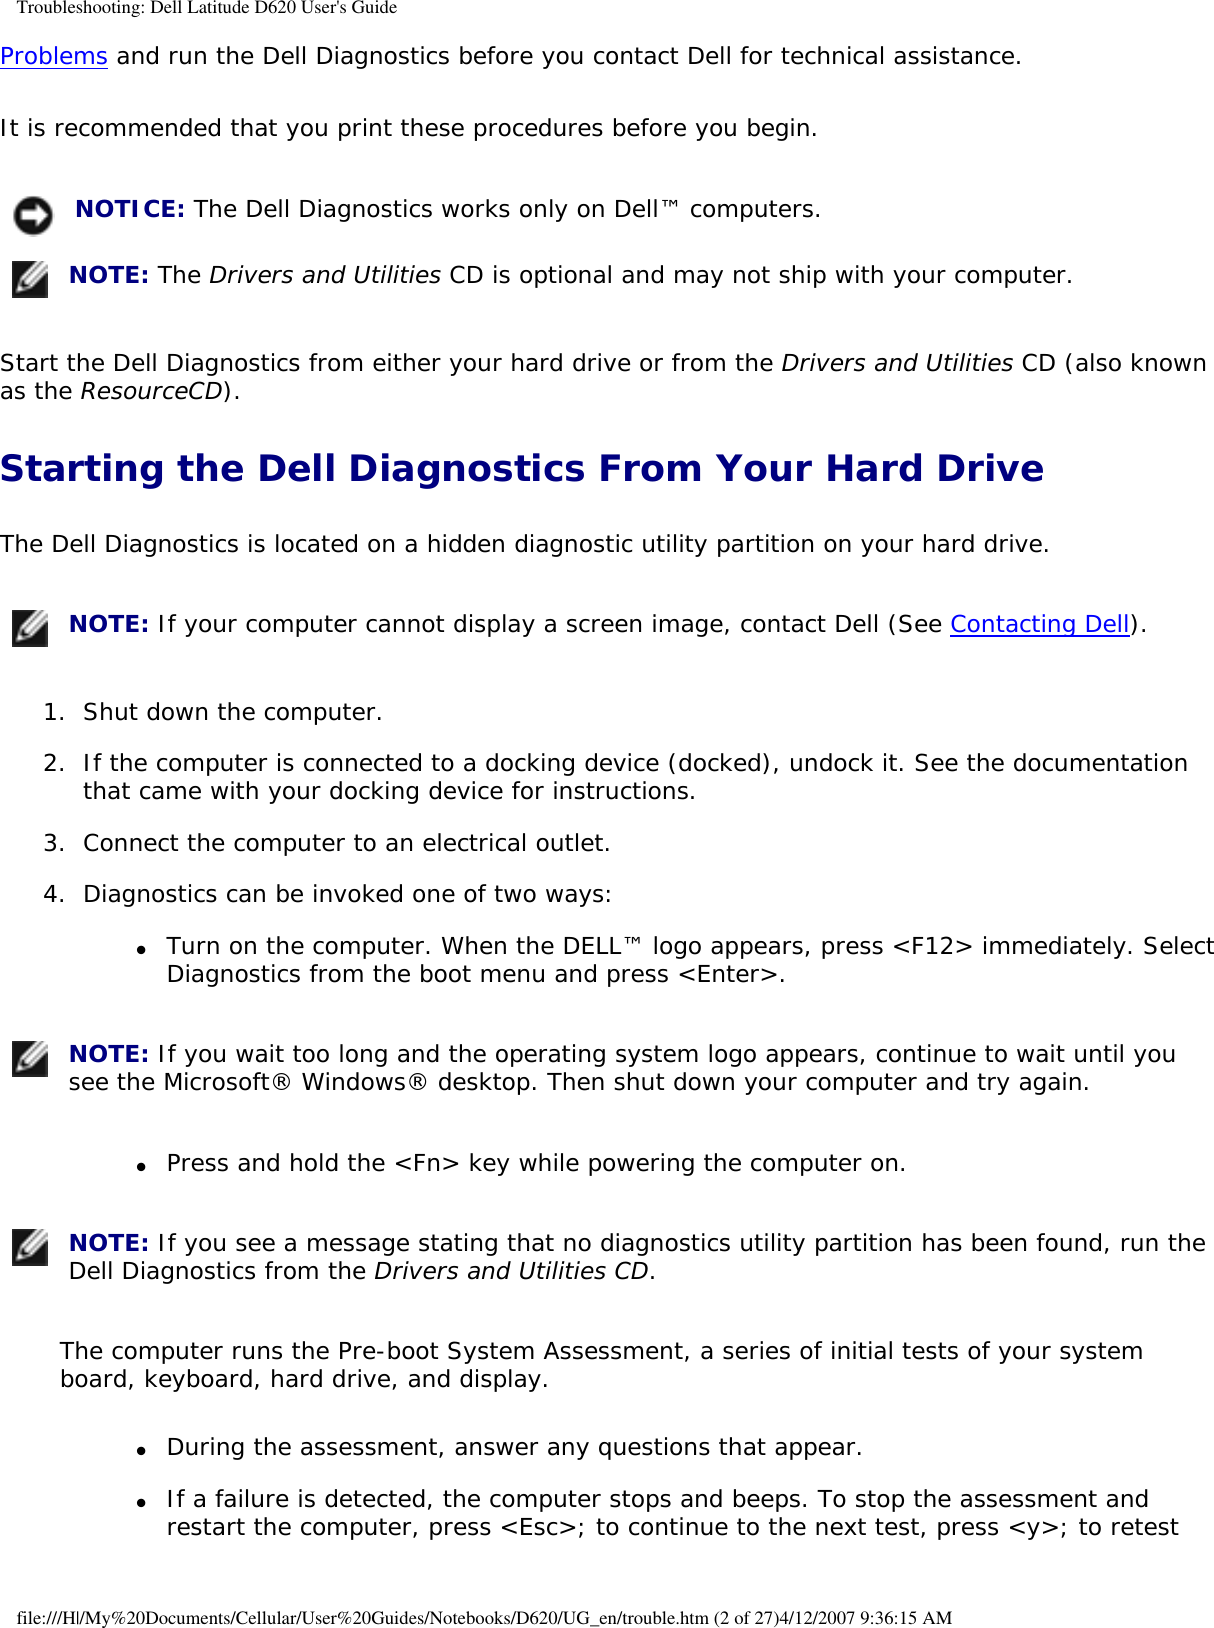 Troubleshooting: Dell Latitude D620 User&apos;s GuideProblems and run the Dell Diagnostics before you contact Dell for technical assistance.It is recommended that you print these procedures before you begin. NOTICE: The Dell Diagnostics works only on Dell™ computers. NOTE: The Drivers and Utilities CD is optional and may not ship with your computer.Start the Dell Diagnostics from either your hard drive or from the Drivers and Utilities CD (also known as the ResourceCD).Starting the Dell Diagnostics From Your Hard DriveThe Dell Diagnostics is located on a hidden diagnostic utility partition on your hard drive. NOTE: If your computer cannot display a screen image, contact Dell (See Contacting Dell).1.  Shut down the computer.   2.  If the computer is connected to a docking device (docked), undock it. See the documentation that came with your docking device for instructions.   3.  Connect the computer to an electrical outlet.   4.  Diagnostics can be invoked one of two ways:   ●     Turn on the computer. When the DELL™ logo appears, press &lt;F12&gt; immediately. Select Diagnostics from the boot menu and press &lt;Enter&gt;.   NOTE: If you wait too long and the operating system logo appears, continue to wait until you see the Microsoft® Windows® desktop. Then shut down your computer and try again.●     Press and hold the &lt;Fn&gt; key while powering the computer on.   NOTE: If you see a message stating that no diagnostics utility partition has been found, run the Dell Diagnostics from the Drivers and Utilities CD.The computer runs the Pre-boot System Assessment, a series of initial tests of your system board, keyboard, hard drive, and display.●     During the assessment, answer any questions that appear.  ●     If a failure is detected, the computer stops and beeps. To stop the assessment and restart the computer, press &lt;Esc&gt;; to continue to the next test, press &lt;y&gt;; to retest file:///H|/My%20Documents/Cellular/User%20Guides/Notebooks/D620/UG_en/trouble.htm (2 of 27)4/12/2007 9:36:15 AM